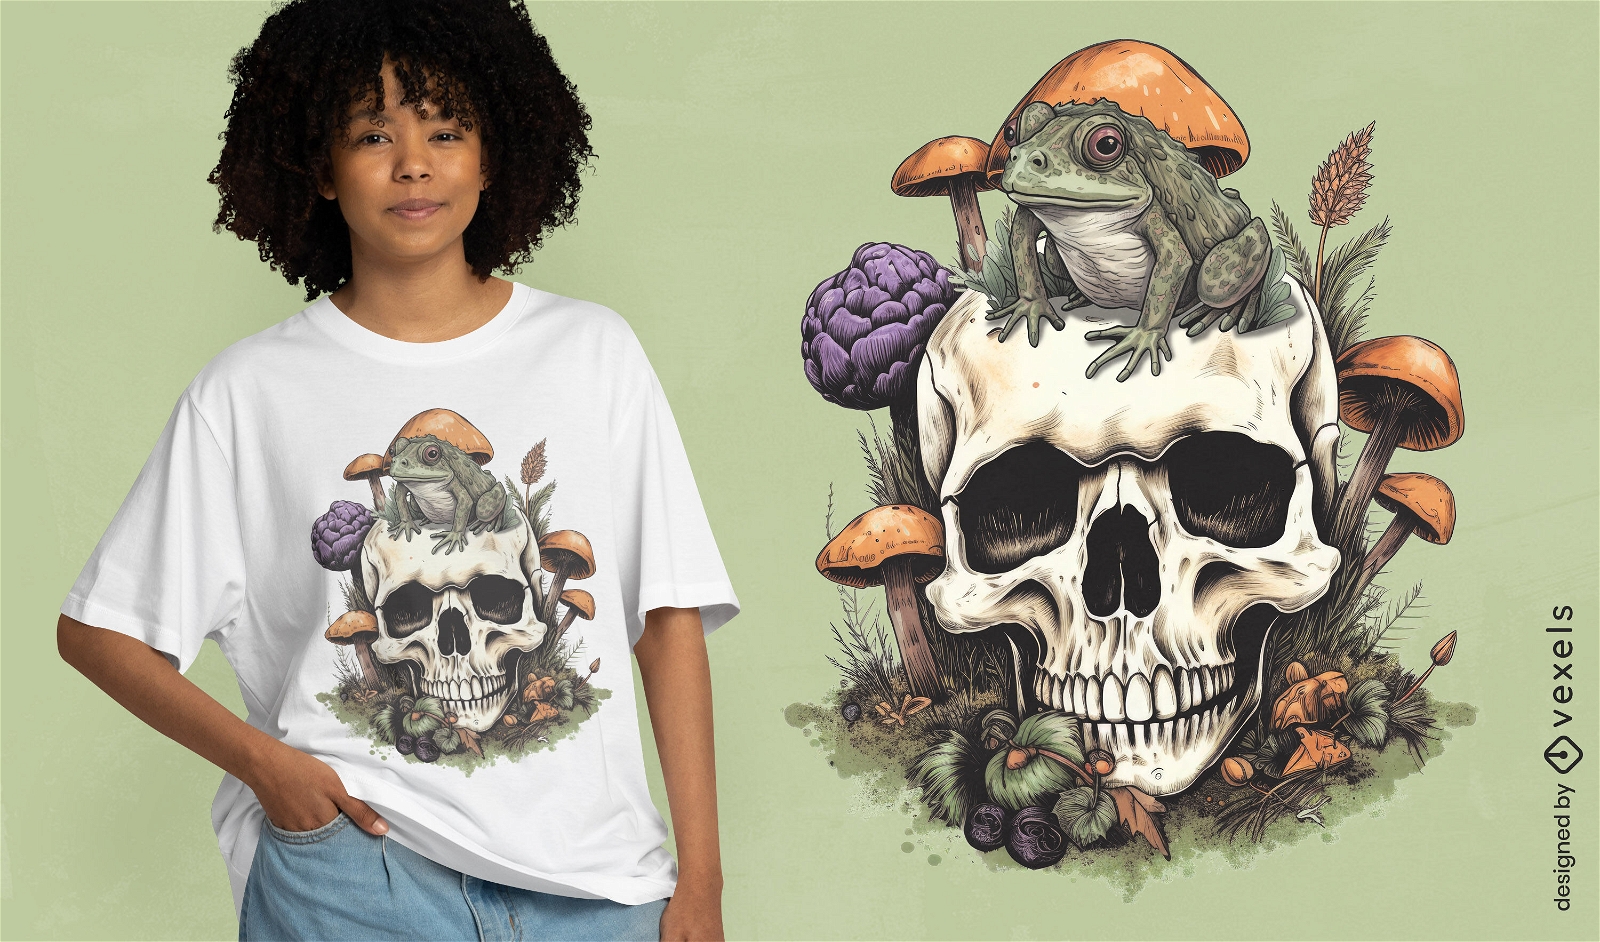 Frog on a skull cpttagecore t-shirt design